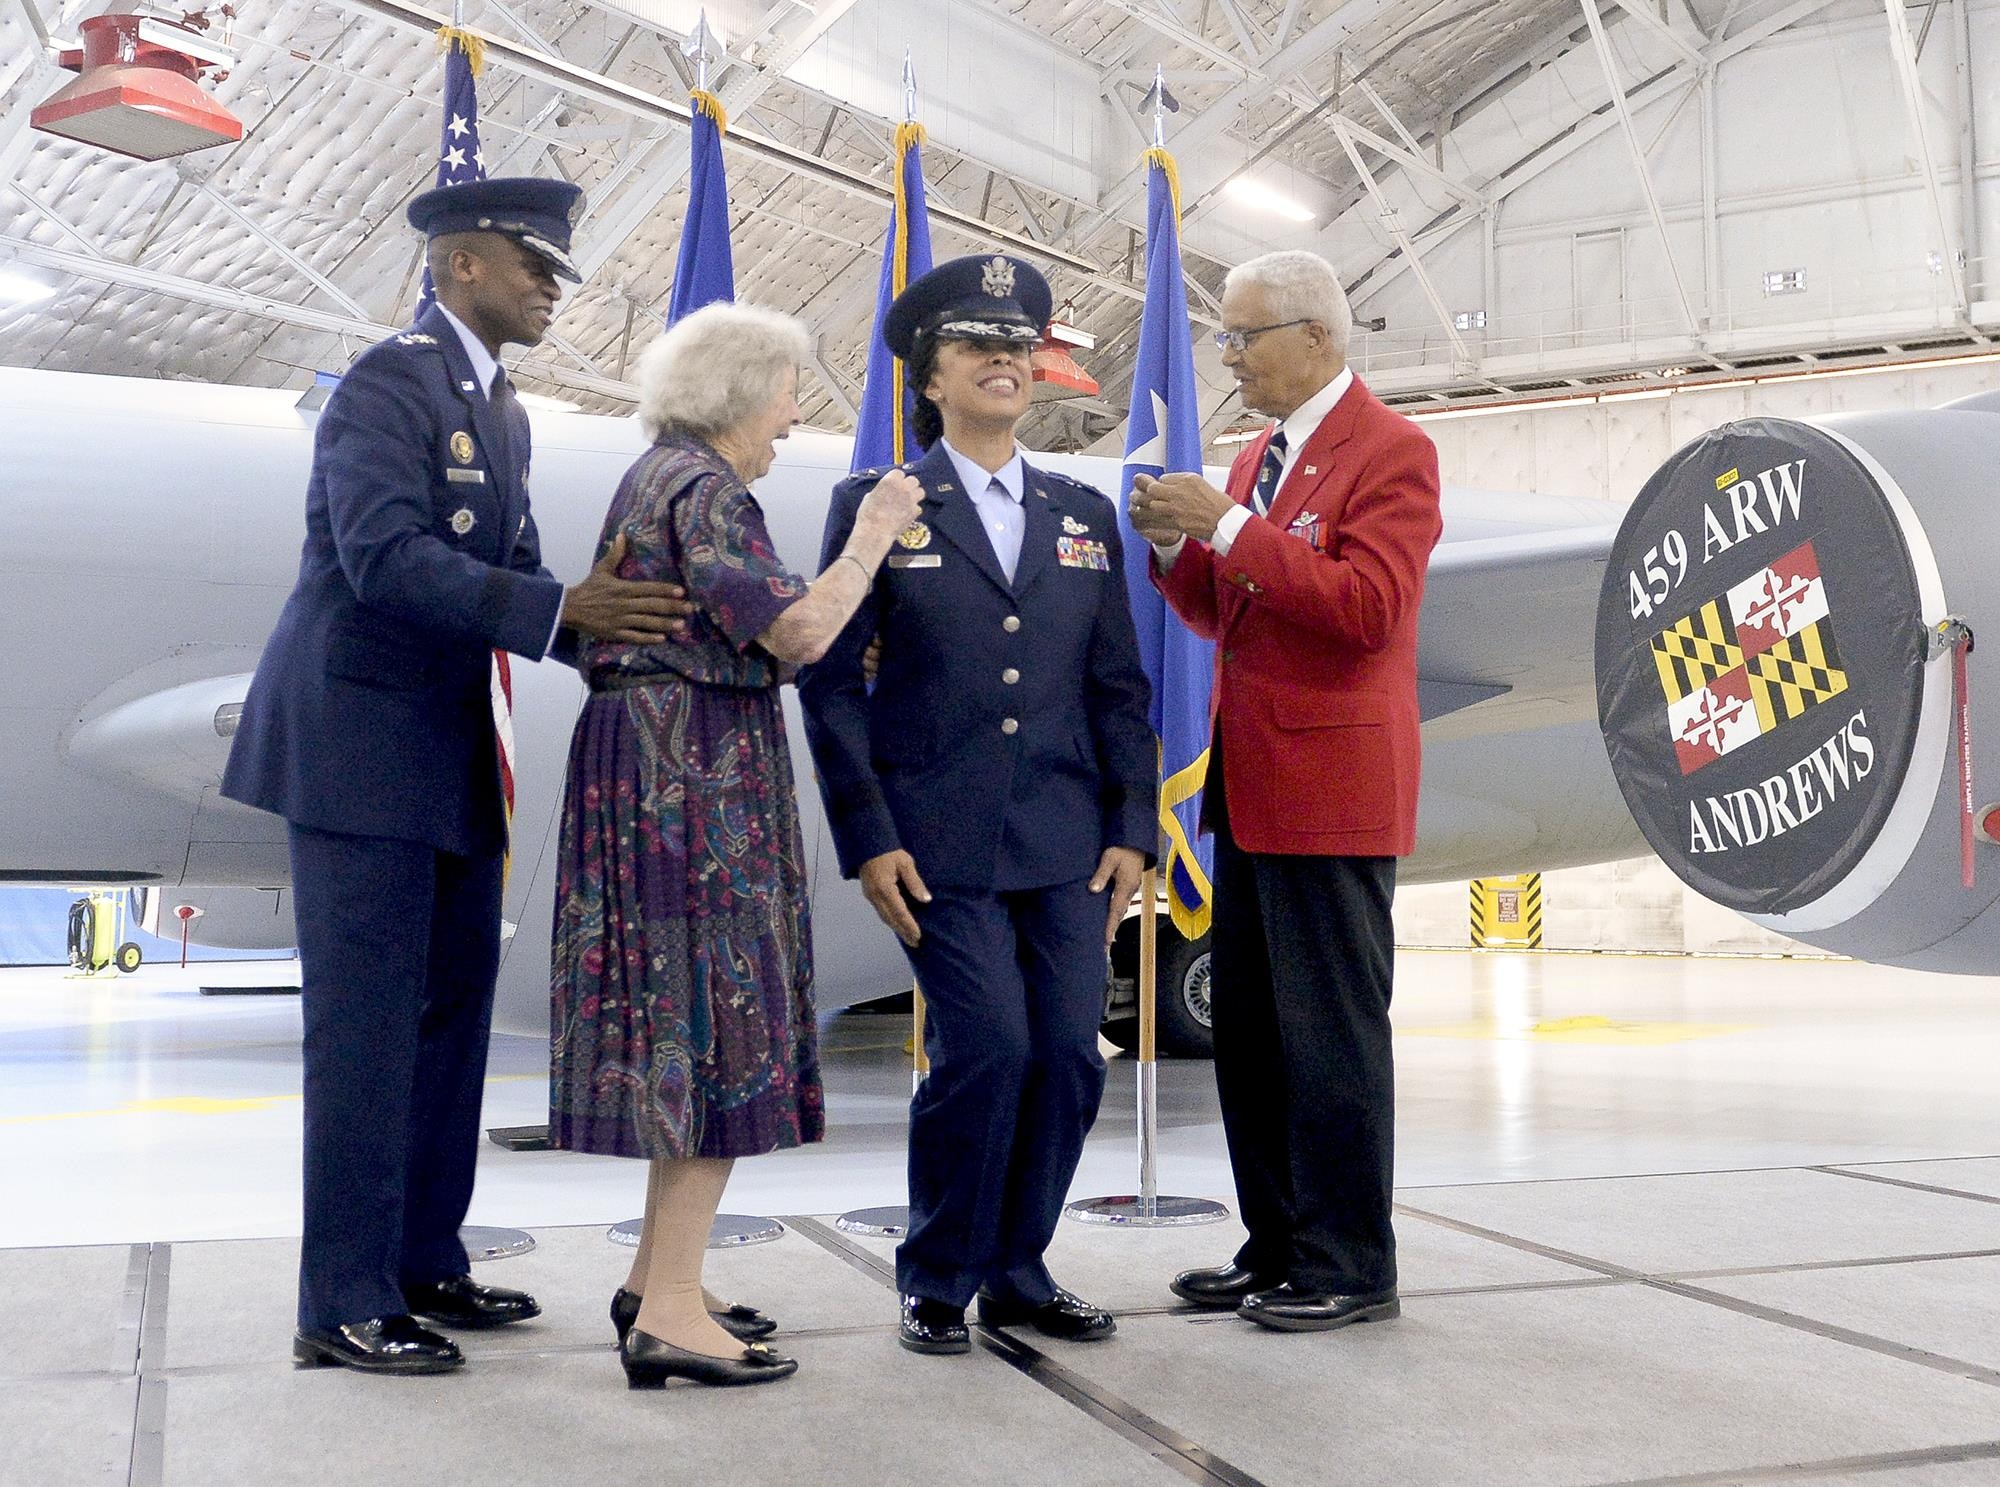 Gen. Darren W. McDew, the U.S. Transportation Command commander, watches as former Women Airforce Service Pilot Pauline Cutler-White and retired Col. Charles McGee, one of the original Tuskegee Airmen, pin new rank on Lt. Gen. Stayce D. Harris during her promotion ceremony Aug. 26, 2016, at Joint Base Andrews, Md. Harris became the Air Force's first black female lieutenant general, and also the first reservist to fill the position of the assistant vice chief of staff and director of the air staff. (U.S. Air Force photo/Andy Morataya)